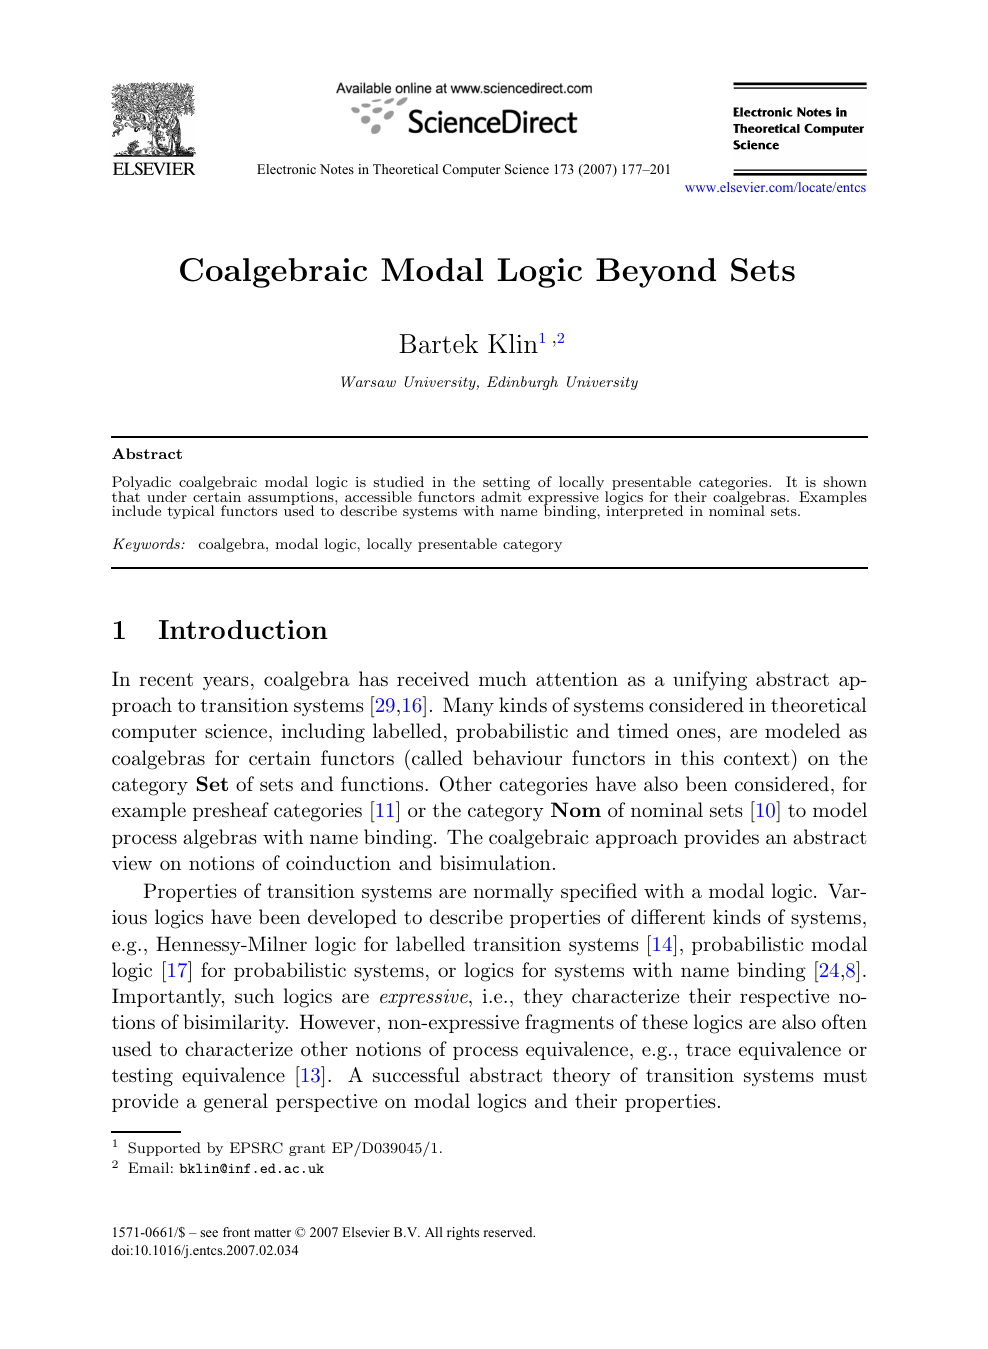 Coalgebraic Modal Logic Beyond Sets Topic Of Research Paper In Computer And Information Sciences Download Scholarly Article Pdf And Read For Free On Cyberleninka Open Science Hub